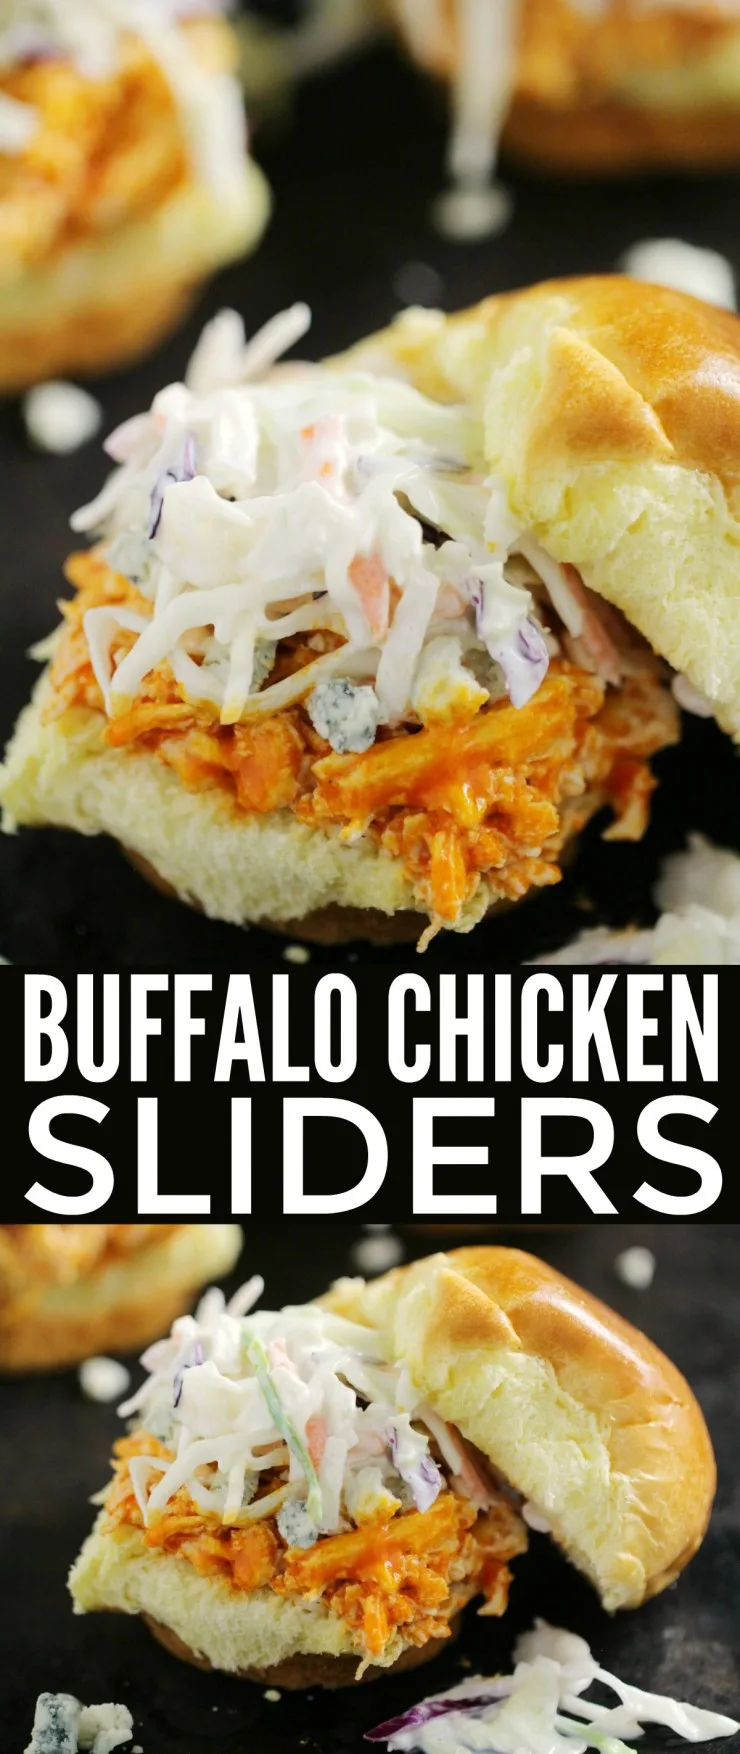 These Quick and Easy Buffalo Chicken Sliders are an easy weeekday meal recipe that easily transition to party appetizer! They come together lightning fast with just a few simple ingredients like shredded chicken, semi-homemade buffalo sauce, and your favourite toppings!